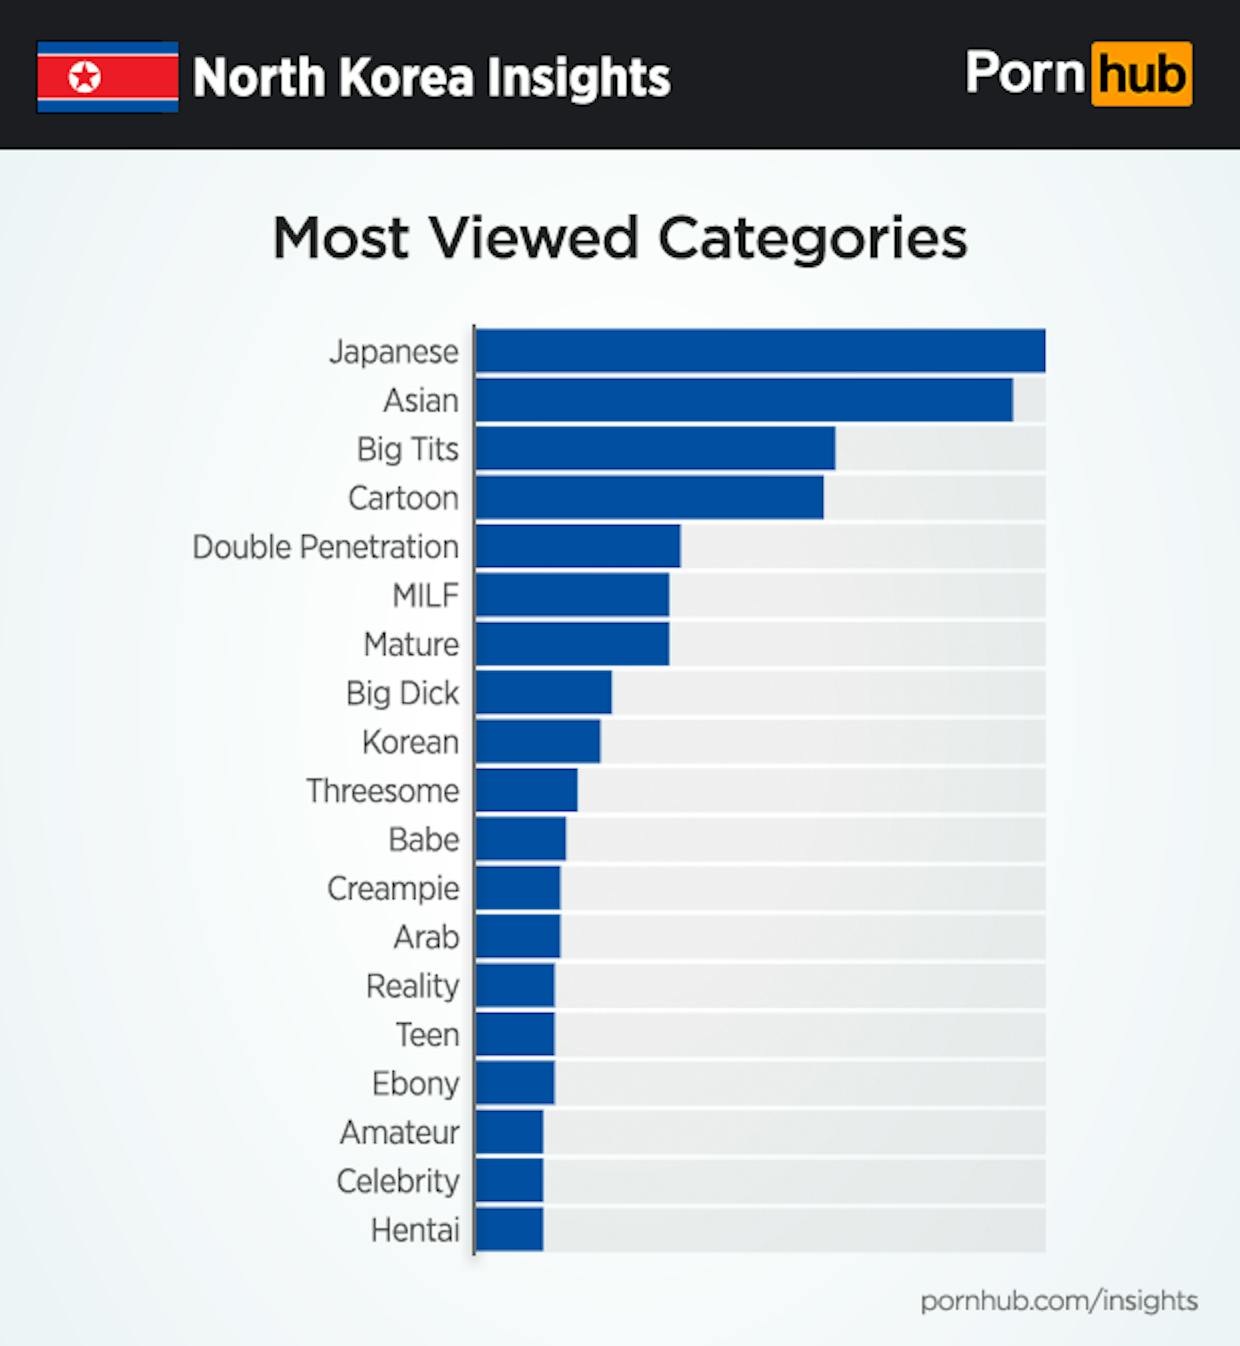 North Korea Military Porn - Pornhub Just Released New Data on What North Koreans Watch ...